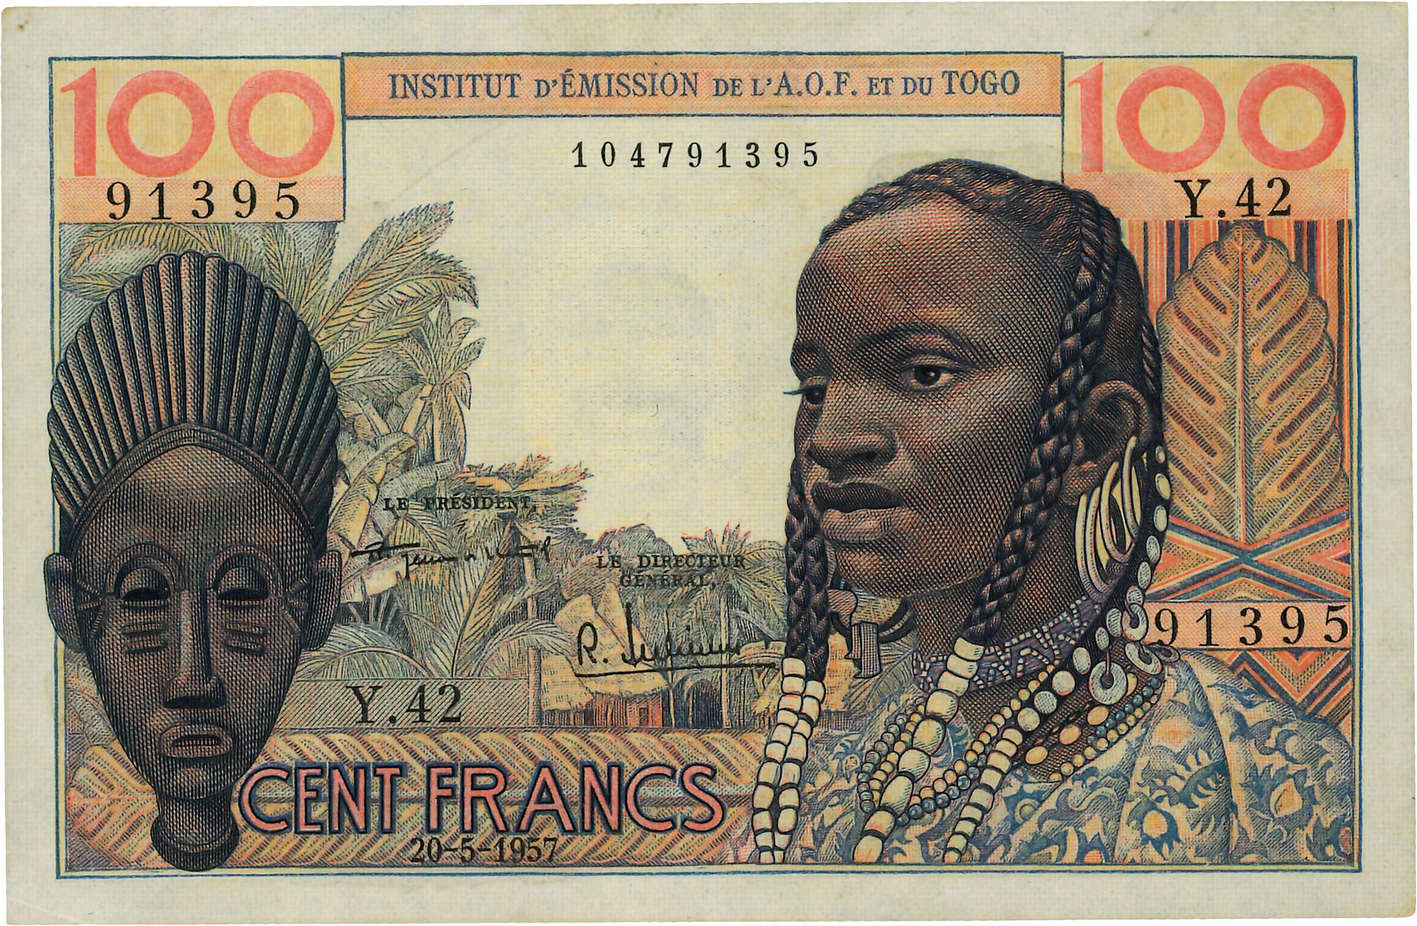 100 Francs FRENCH WEST AFRICA  1957 P.46 SC